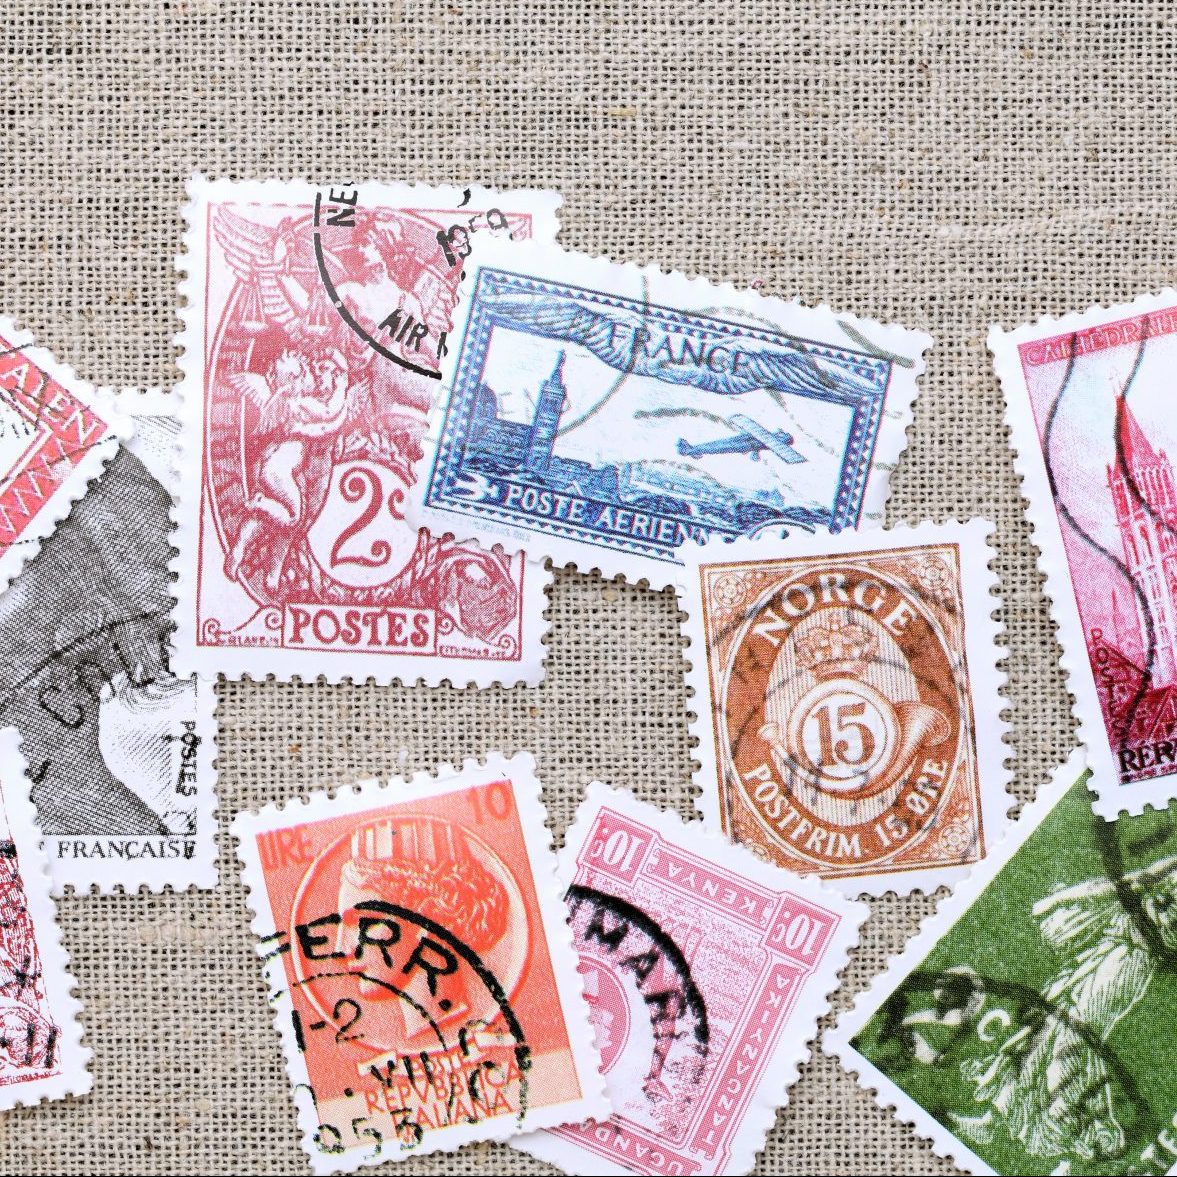 Various stamps laid out